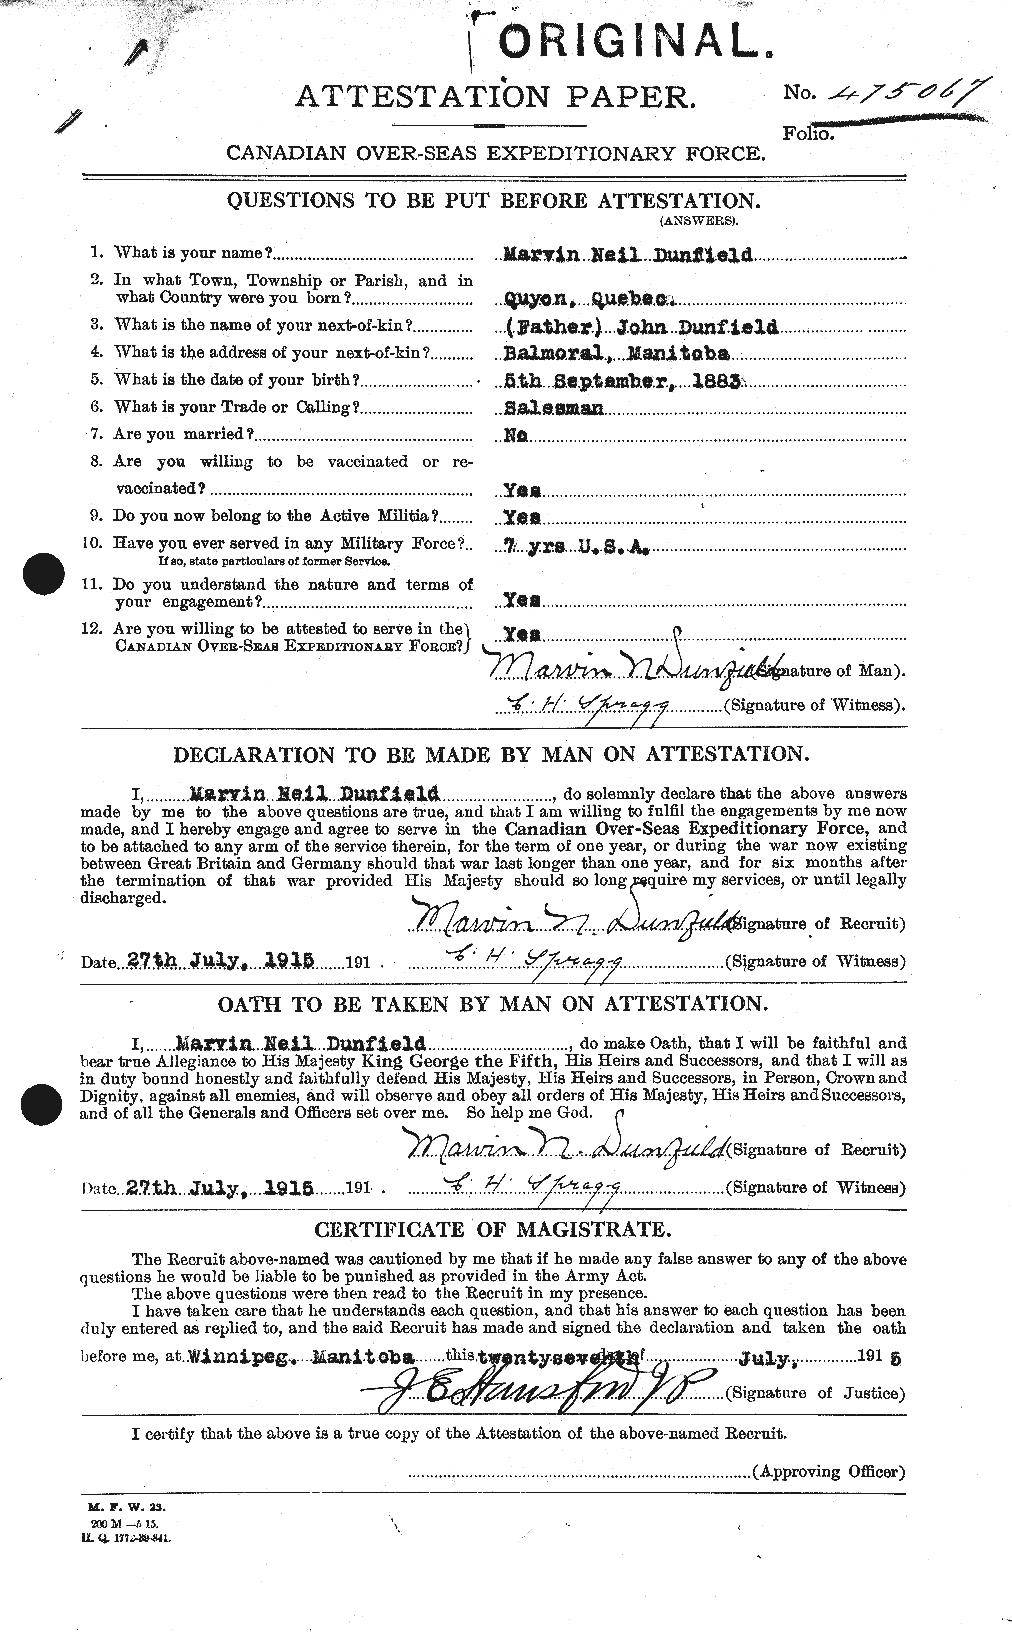 Personnel Records of the First World War - CEF 302461a